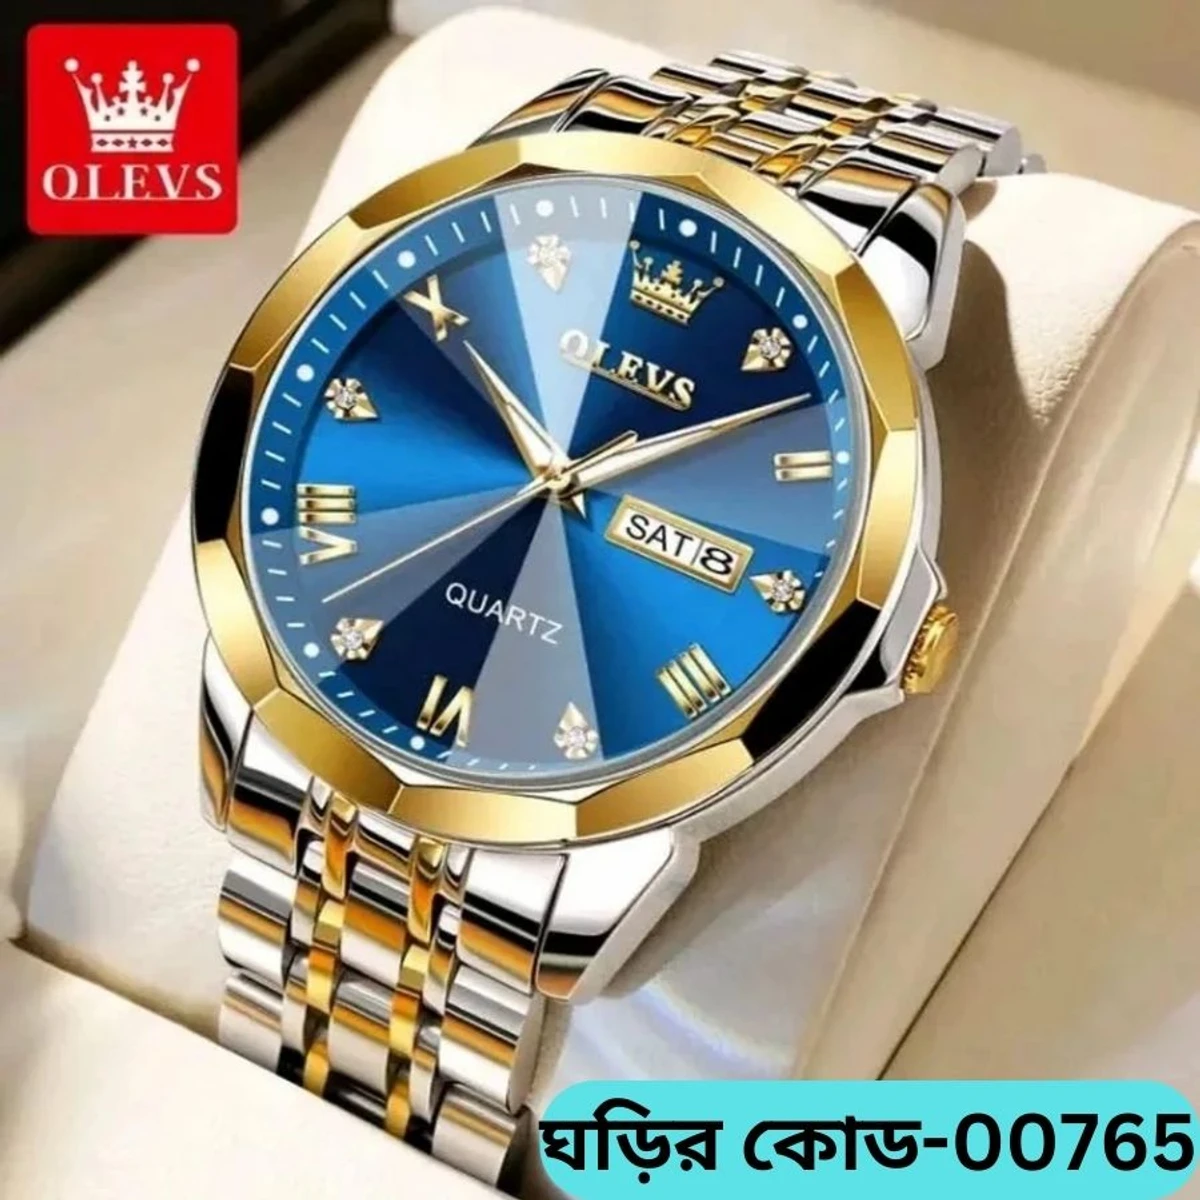 OLEVS MODEL 9931 Watch for Men Stainless Steel Watches - 9941 TOTON AR DIAL BLUE ROUND GOLDEN - - MAN WATCH -  LOCK PUSH